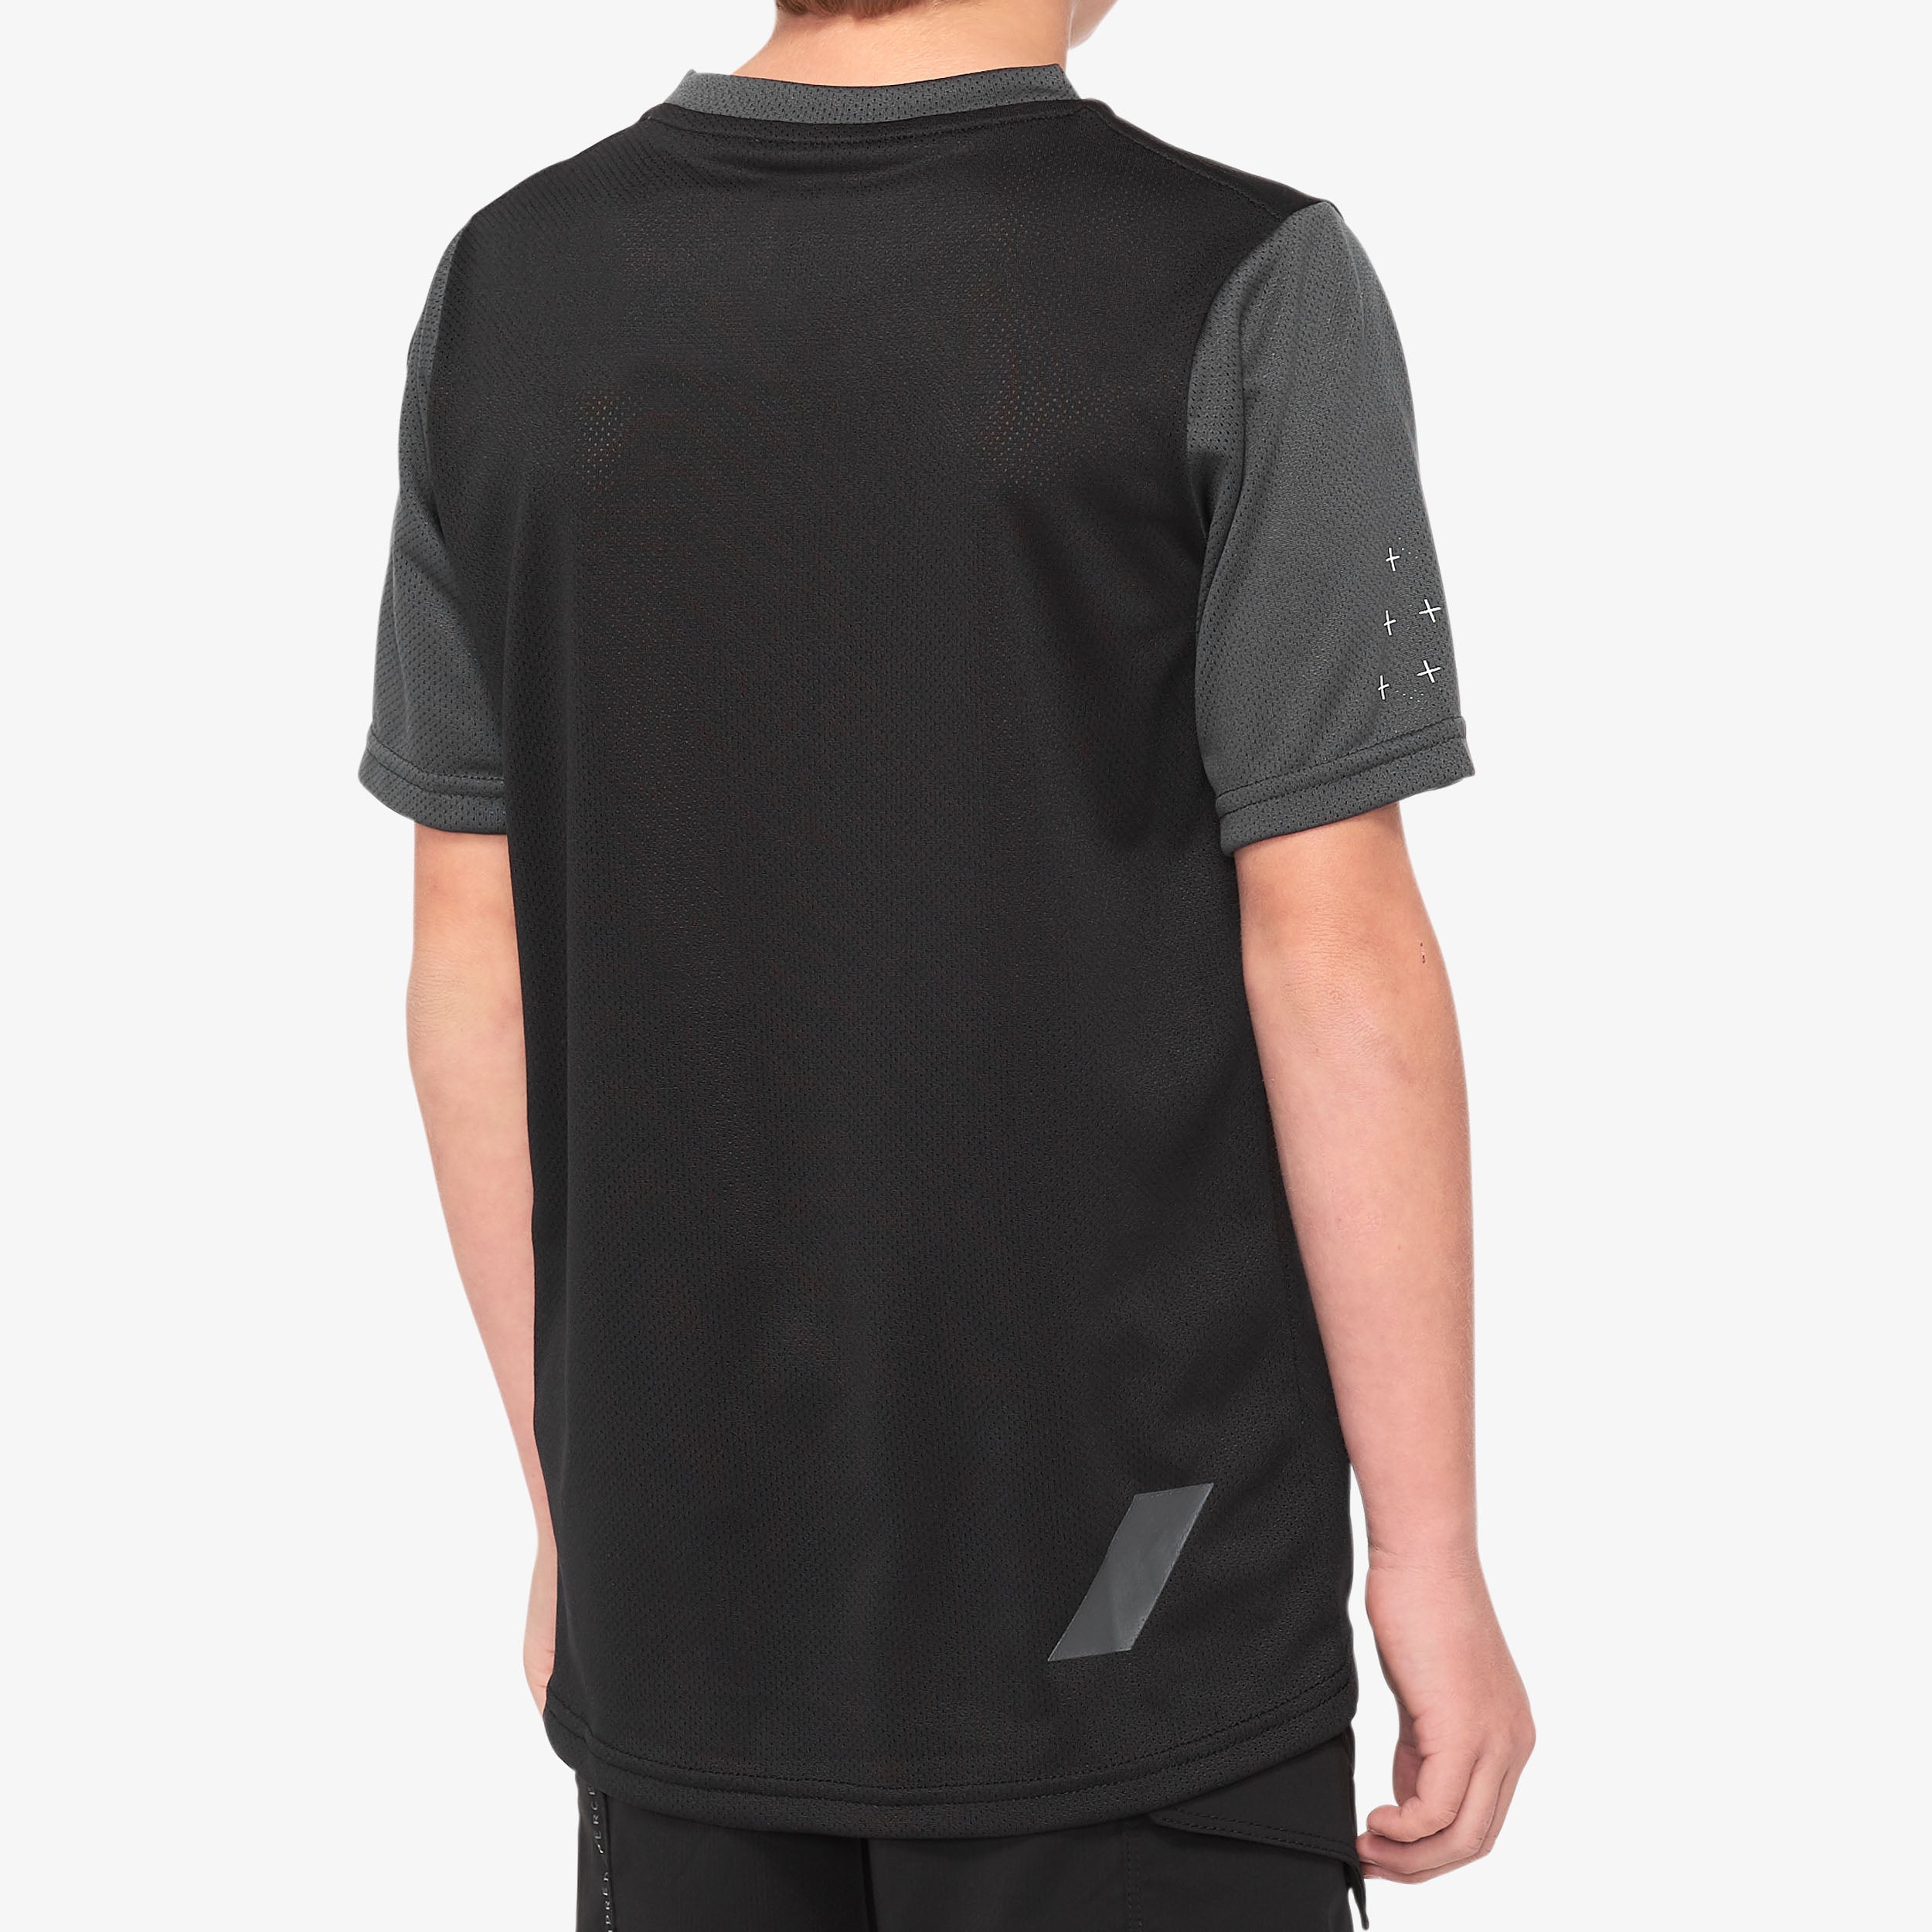 RIDECAMP Youth Short Sleeve Jersey Black/Charcoal - Secondary